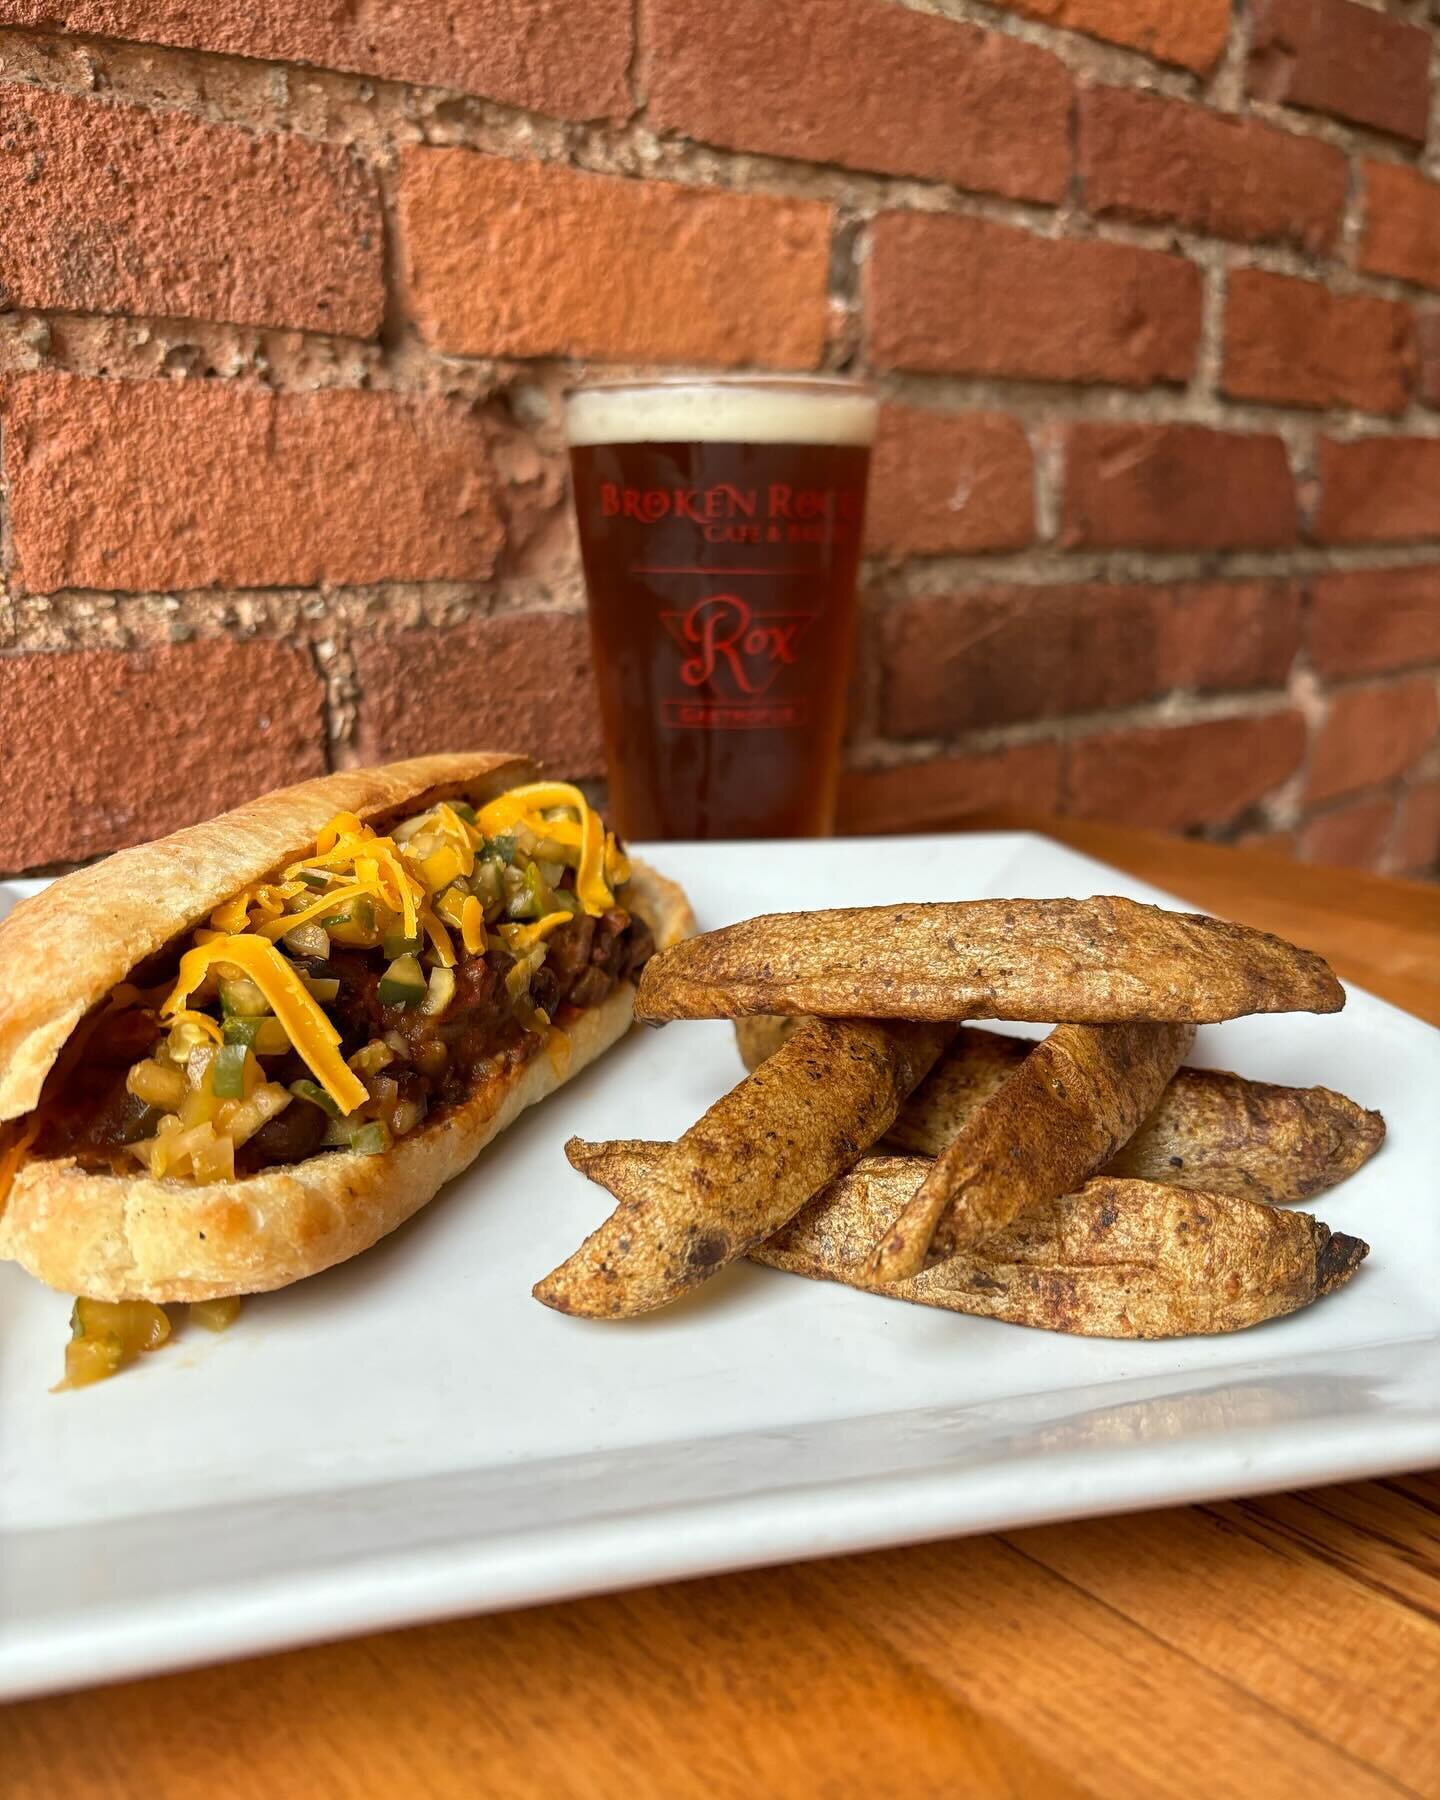 Rox Weekend Special!
Chili Dog with House-made Pickle Onion Relish, Cheddar Cheese, served with a side of JoJos 🌭 🍺